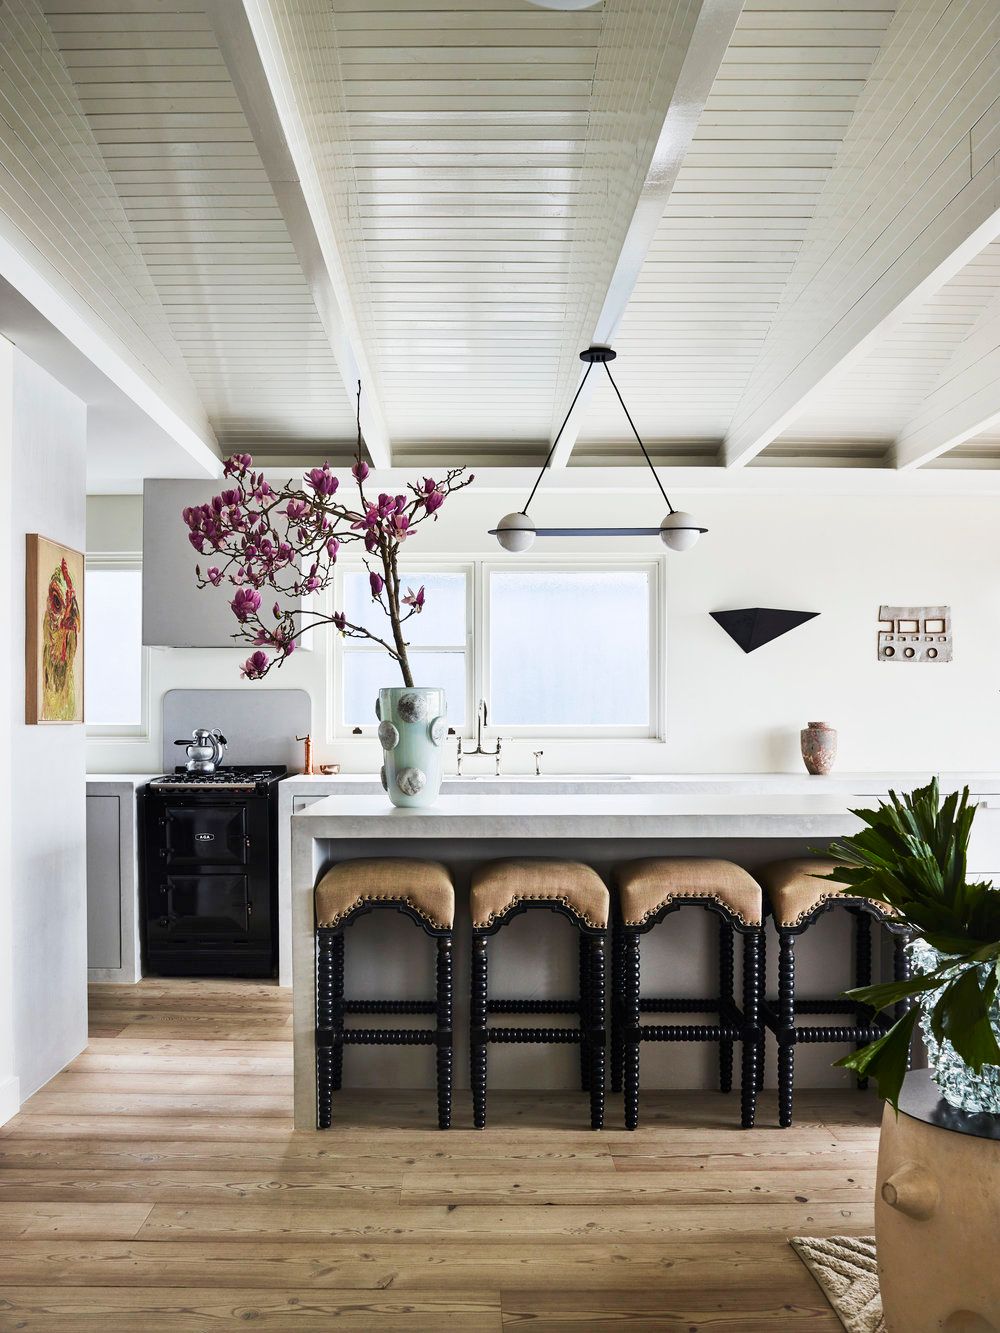 Tour This Stunning Modern Spanish Home in L.A. - Inspired By This